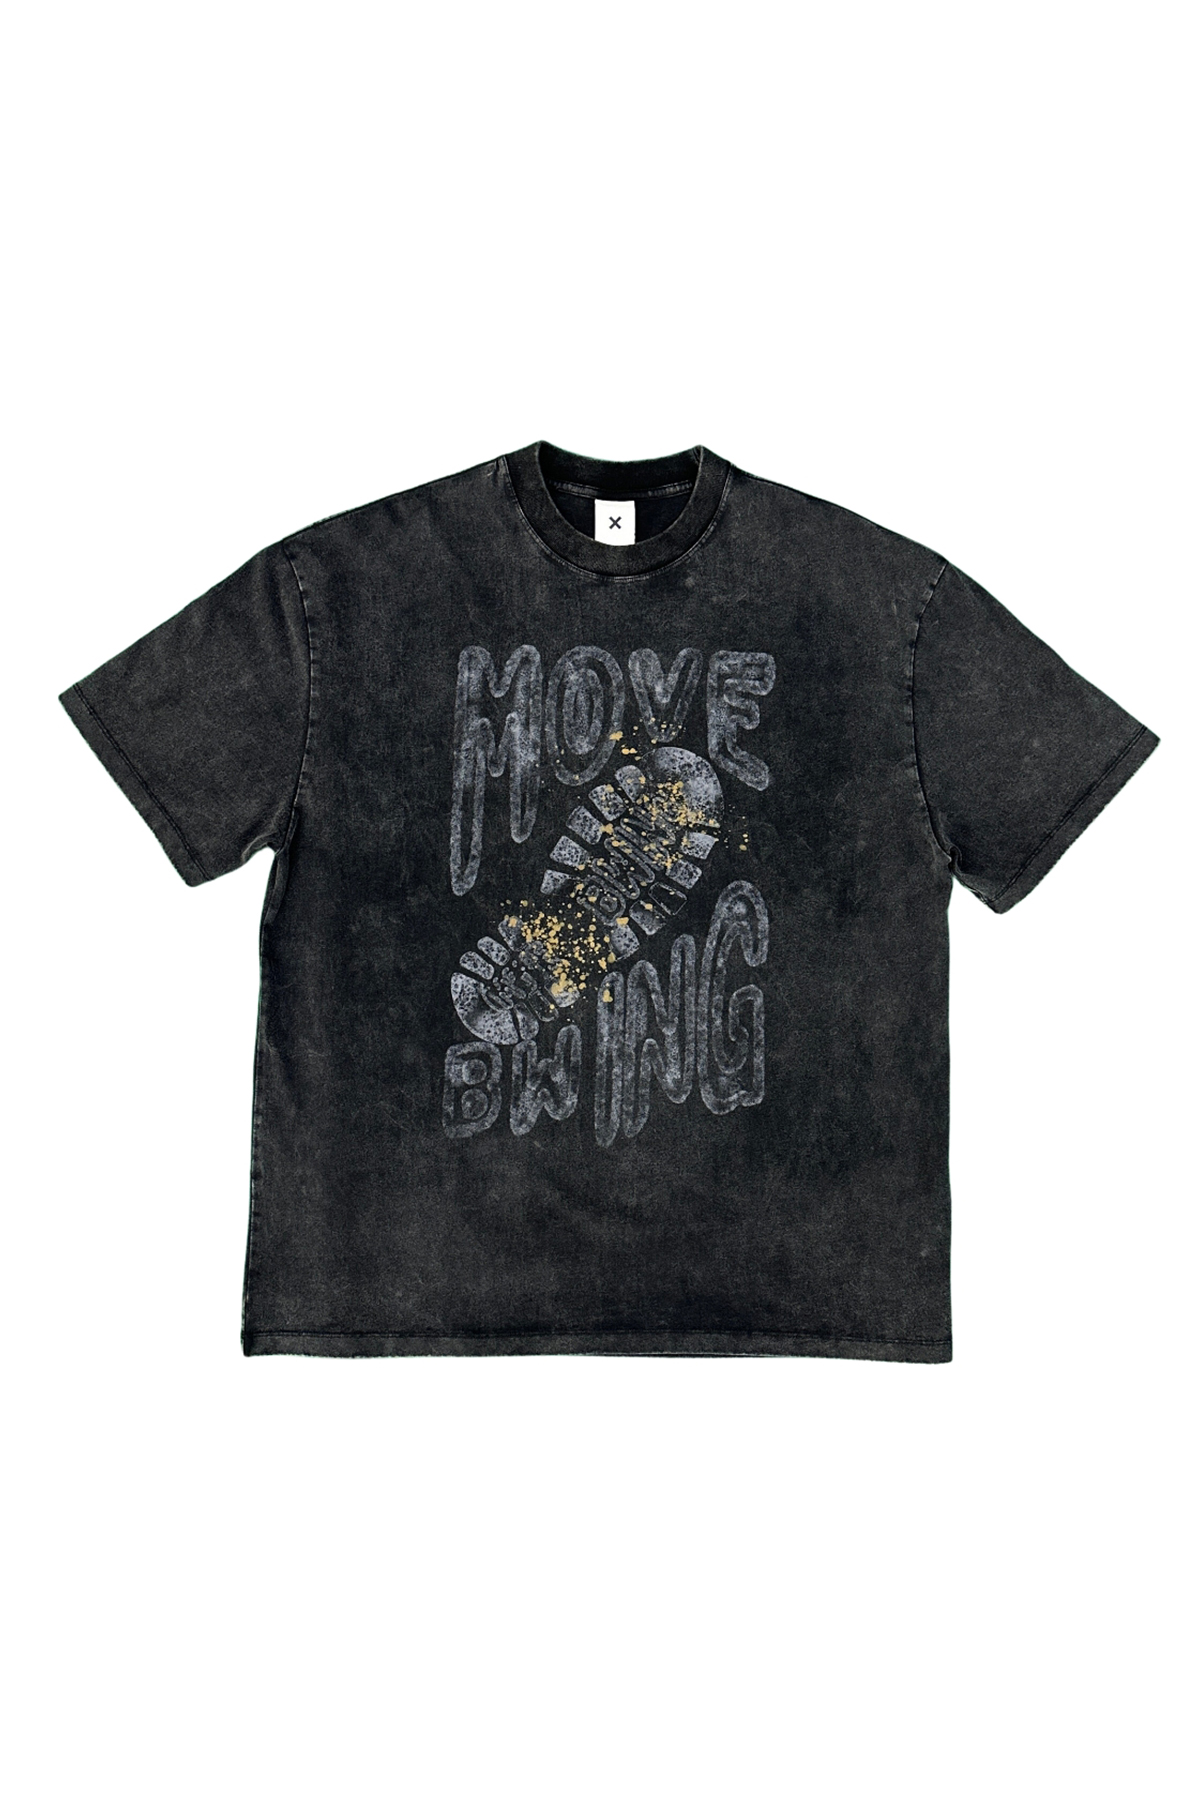 Move-Bwing-Vintage-T-shirt-Front